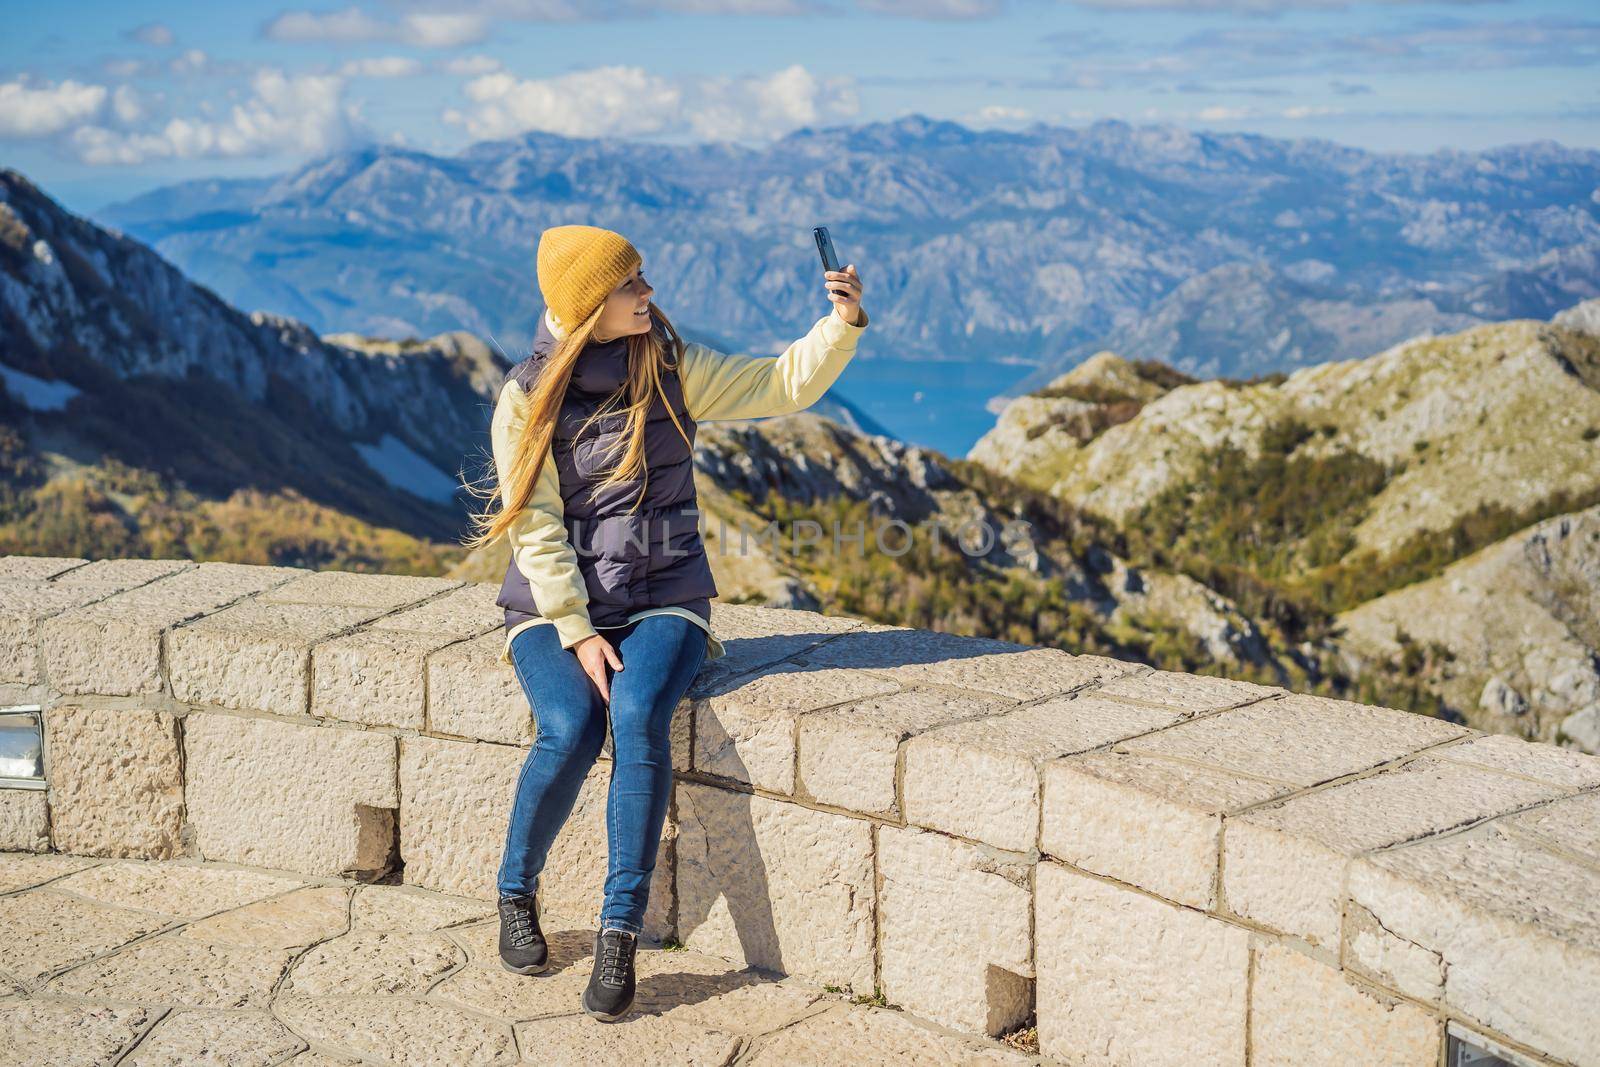 Woman traveller in mountain landscape at national park Lovcen, Montenegro. Travel to Montenegro concept.